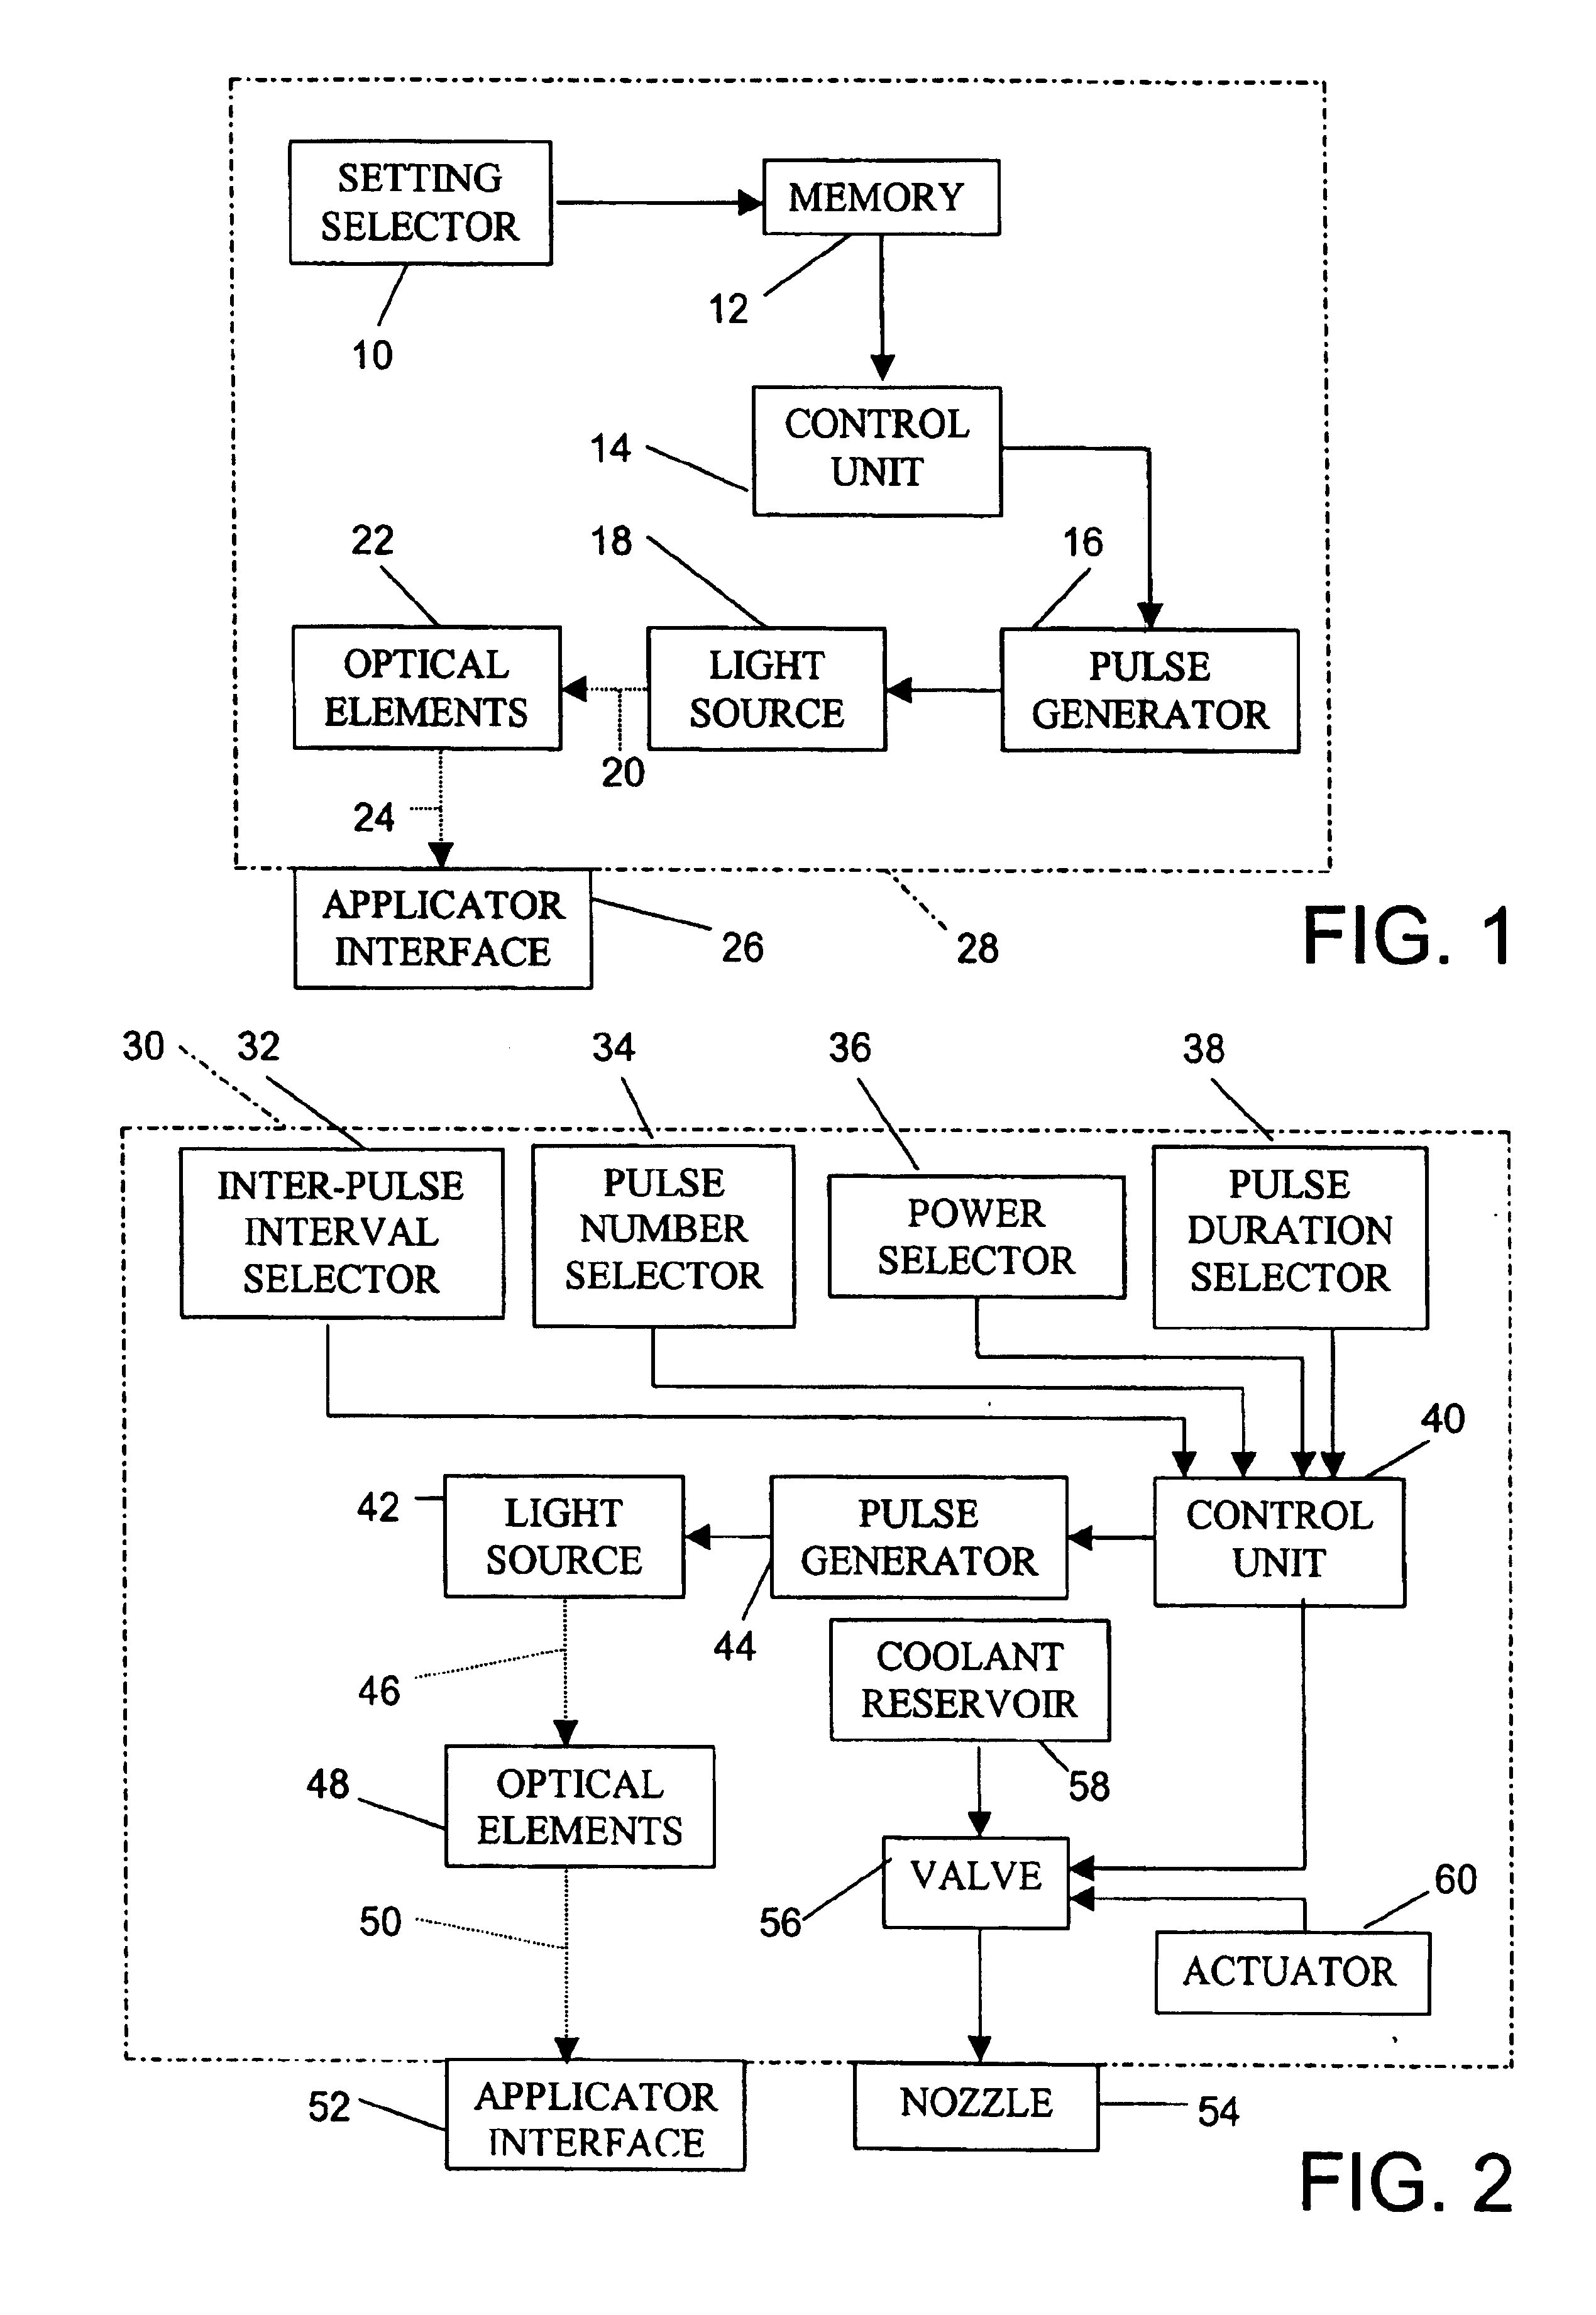 Device for applying electromagnetic radiation for treatment